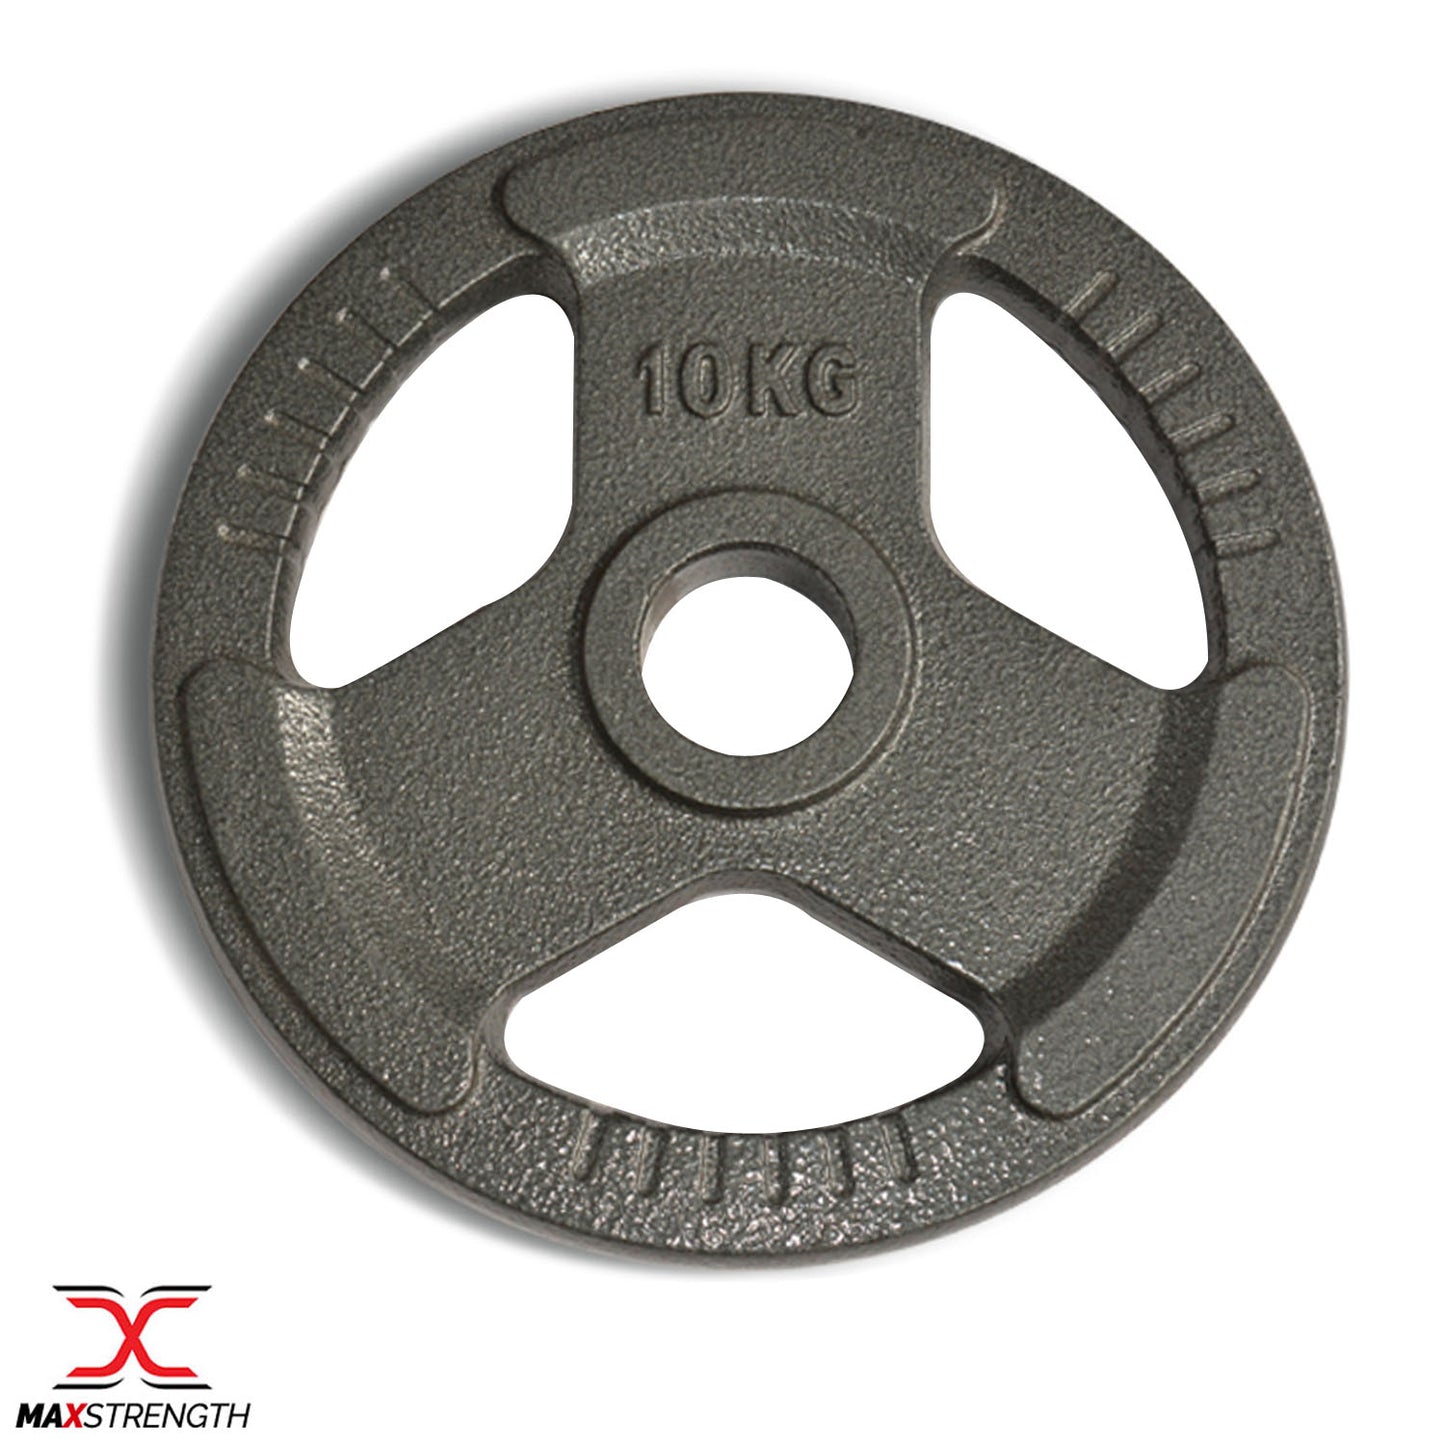 Weightlifting Barbell Plates